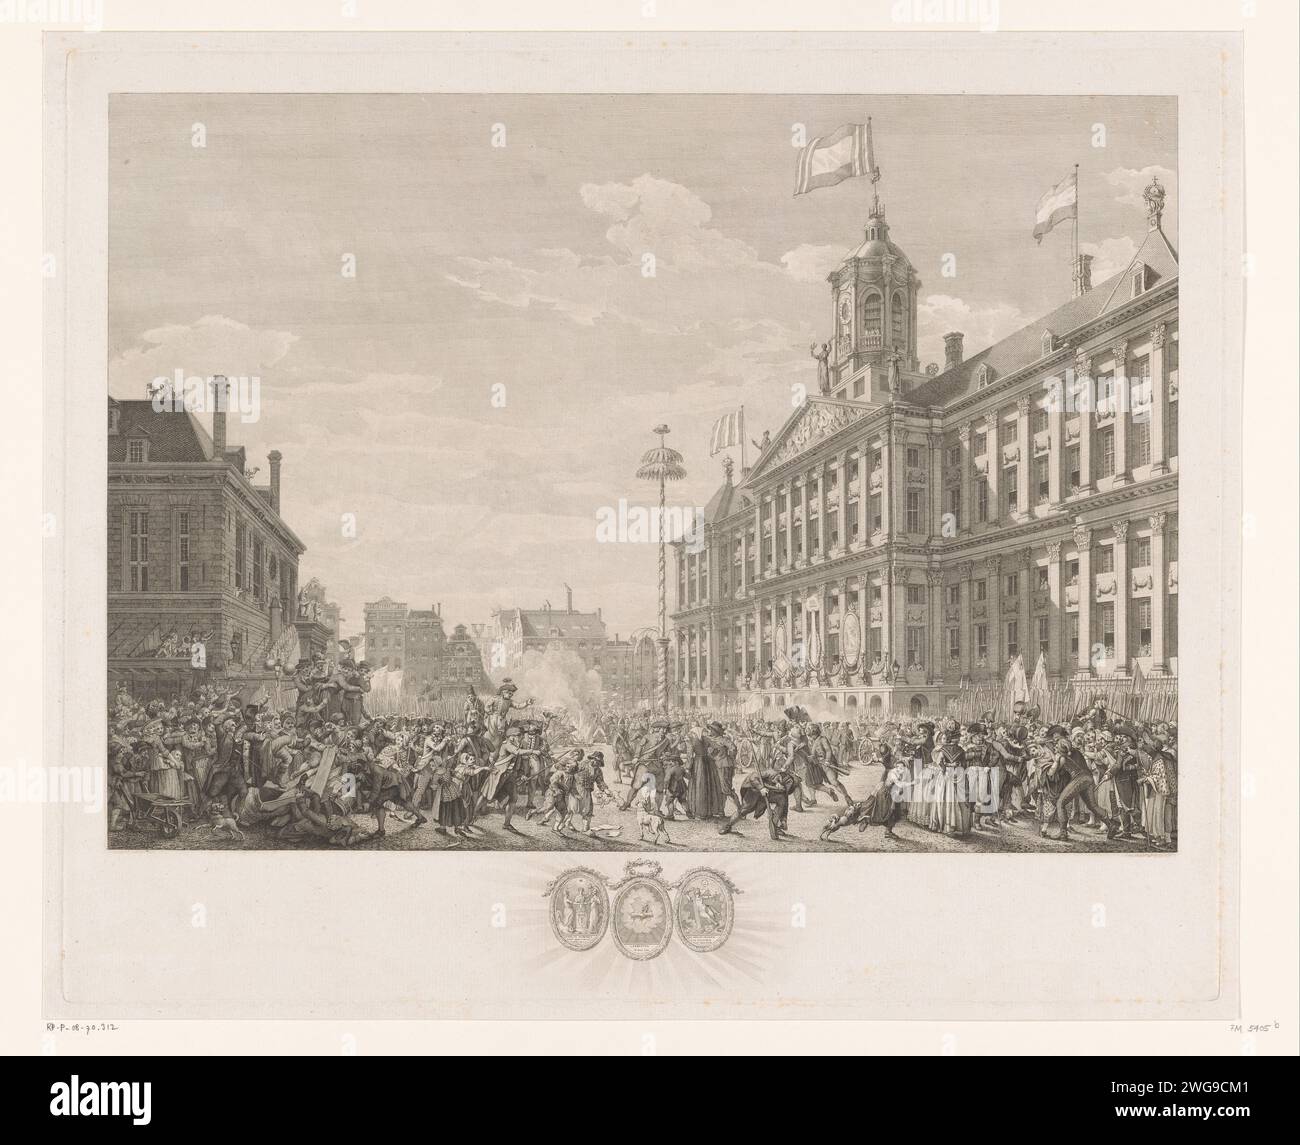 Alliantiegeest Op Dam, 1795, Reinier Vinkeles (I), After Jacques Kuyper, 1796 print The Alliance party on Dam Square in front of the Town Hall in Amsterdam, to celebrate the Alliance closed between the French and the Batavian Republic, 19 June 1795. Chaotic Festive, Central De Vrijheidsboom. In the caption the three oval medallions with allegorical representations that hung on the facade of the town hall. Amsterdam paper etching dancing around the tree of liberty. alliance, league, union, foedus Dam. City Hall of Amsterdam (1655-1808). Waag on Dam Square Stock Photo